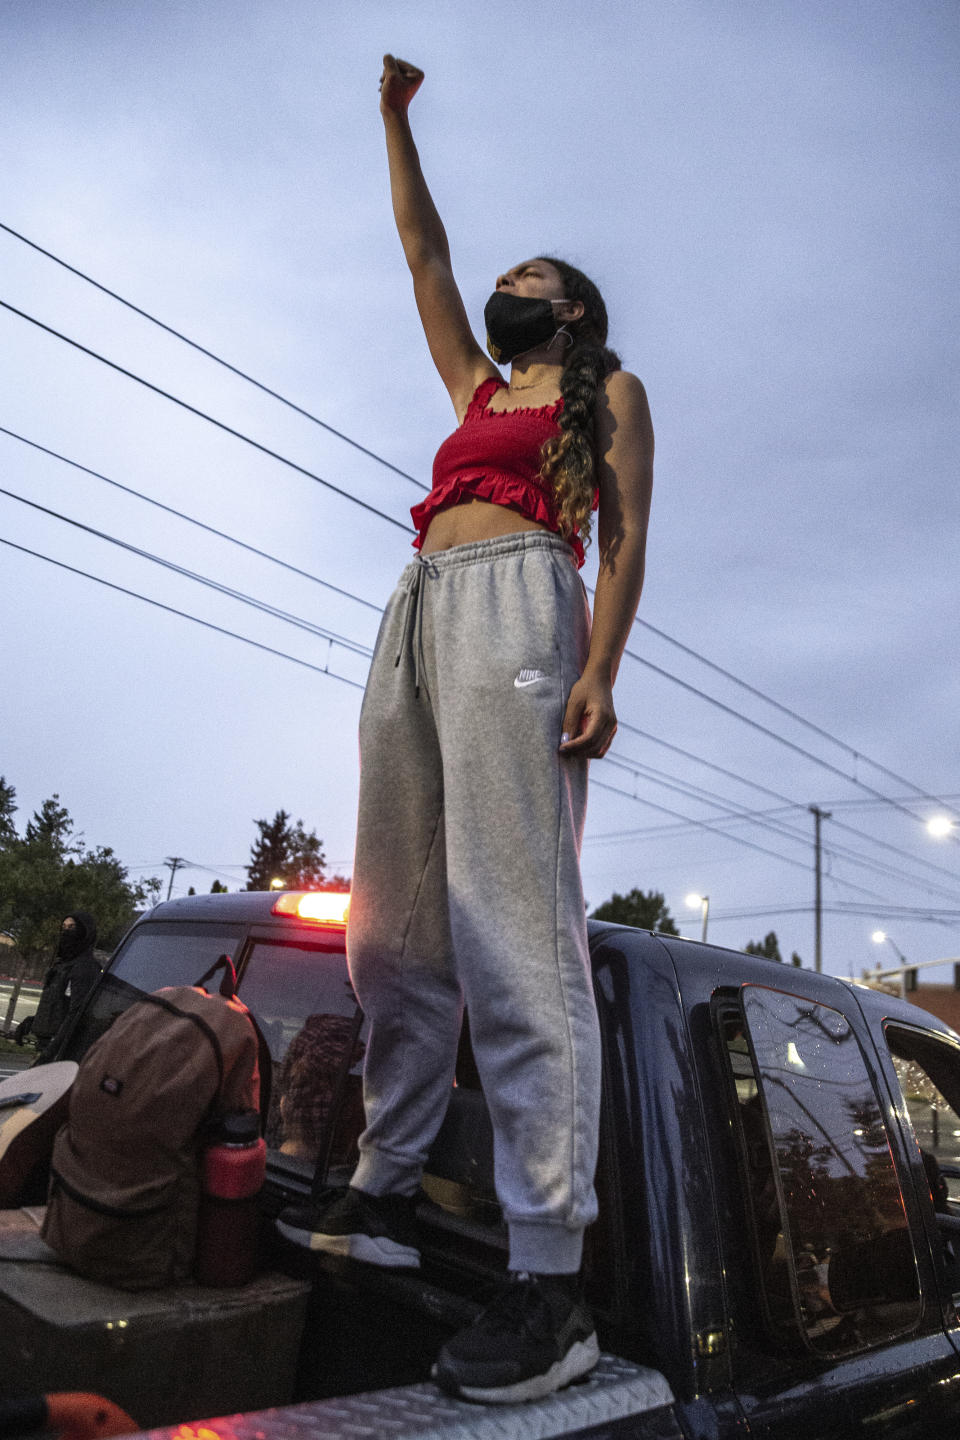 Protesters march from Kenton Park to the Portland Police Association in Portland, Ore., Thursday, Aug. 20, 2020. The event was peaceful and law enforcement did not intervene. (Mark Graves/The Oregonian via AP)